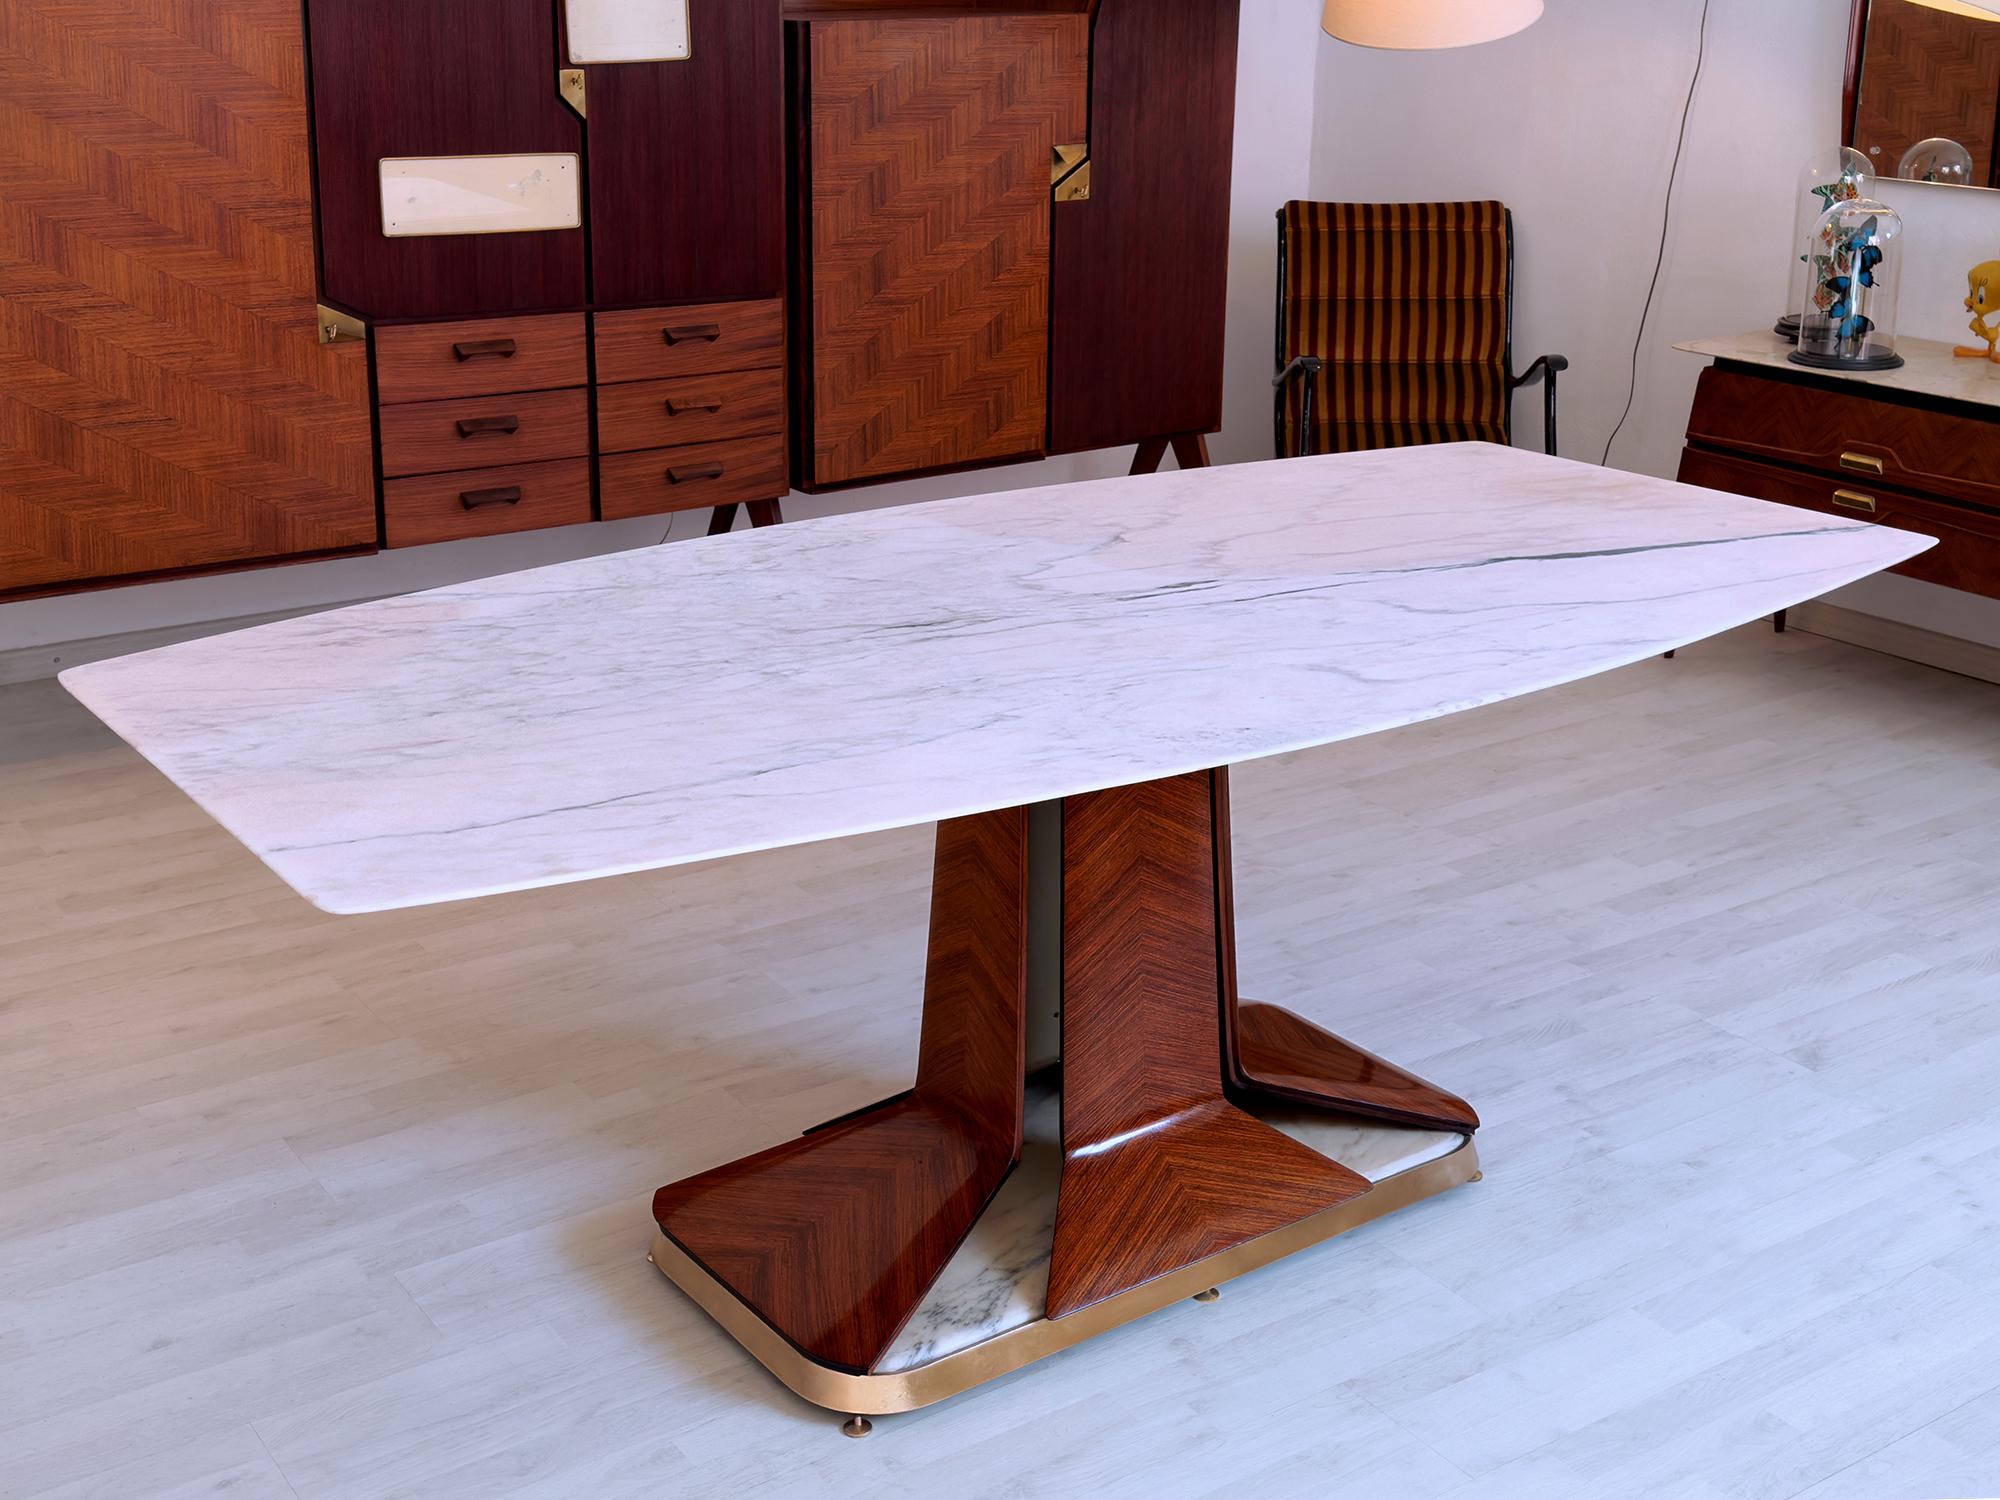 This stunning dining Table of the 1950s is attributable to the design of Vittorio Dassi and/or the production of La Permanente Mobili Cantù.
It’s characterized by a white Carrara marble top plane with a unique sculptural shape, with two areas that